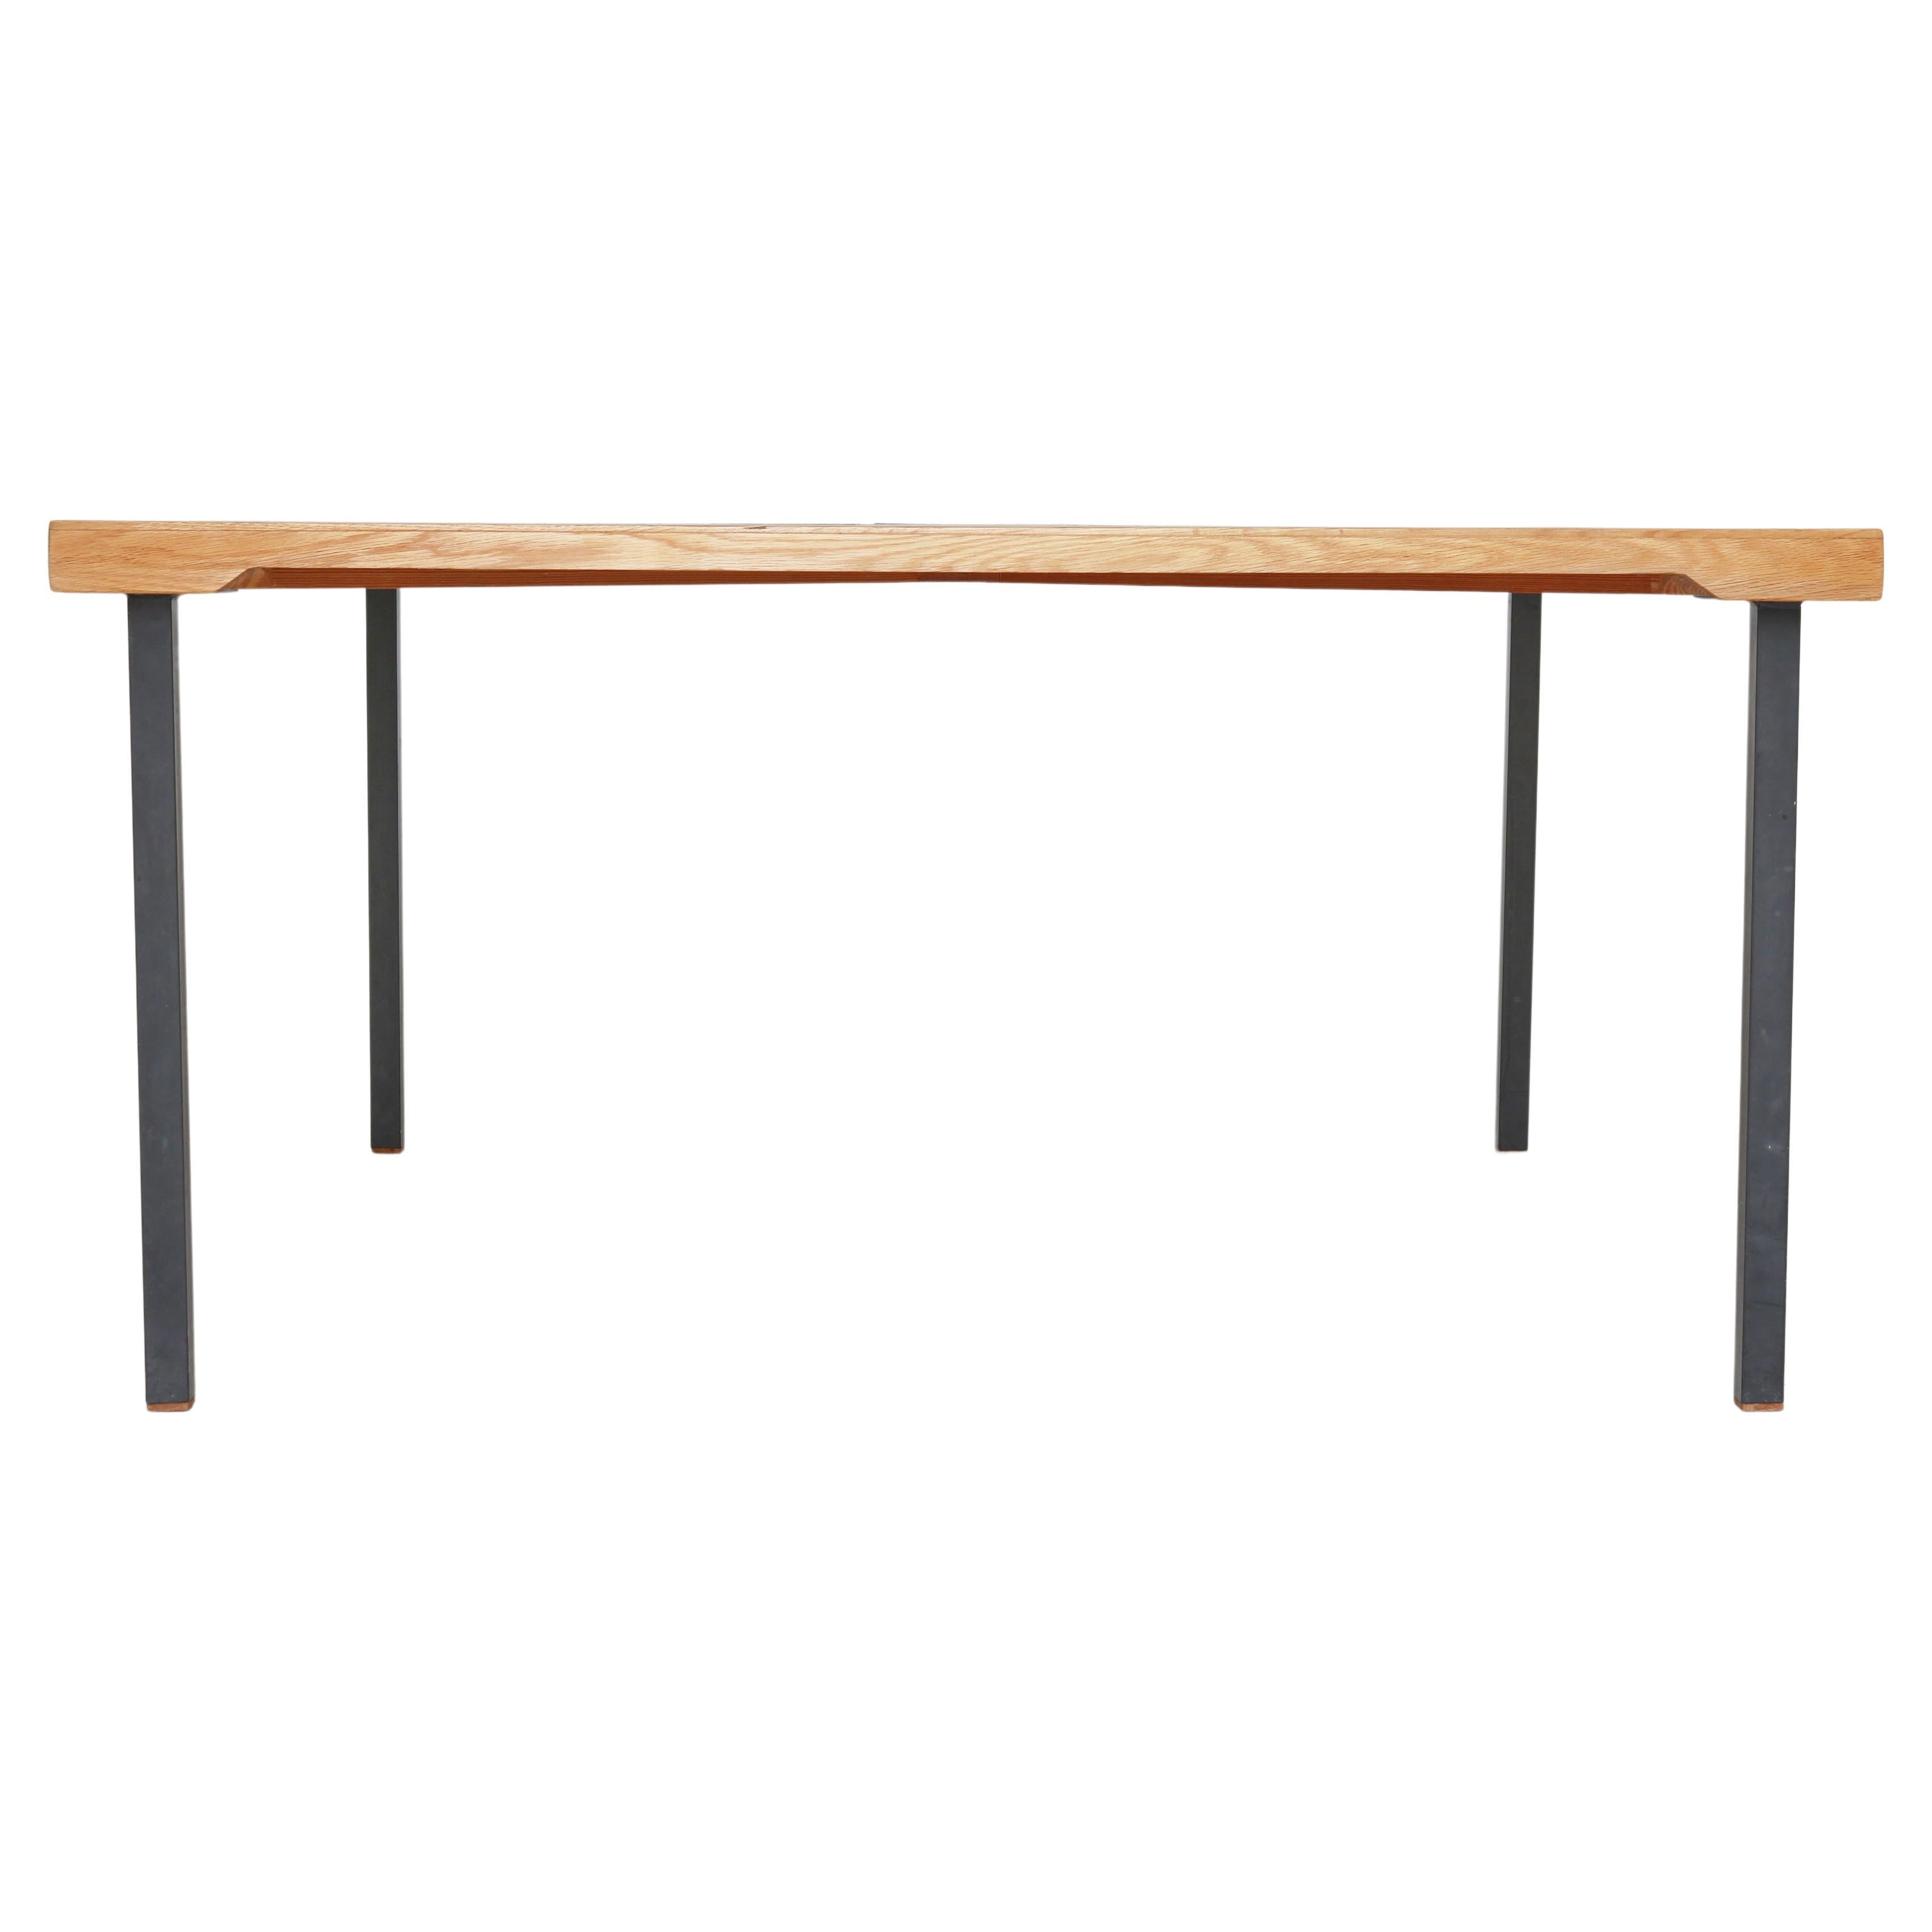 Scandianvian Modern Square Table in Oak Wood with Blue Ceramic Tiles, 1960s